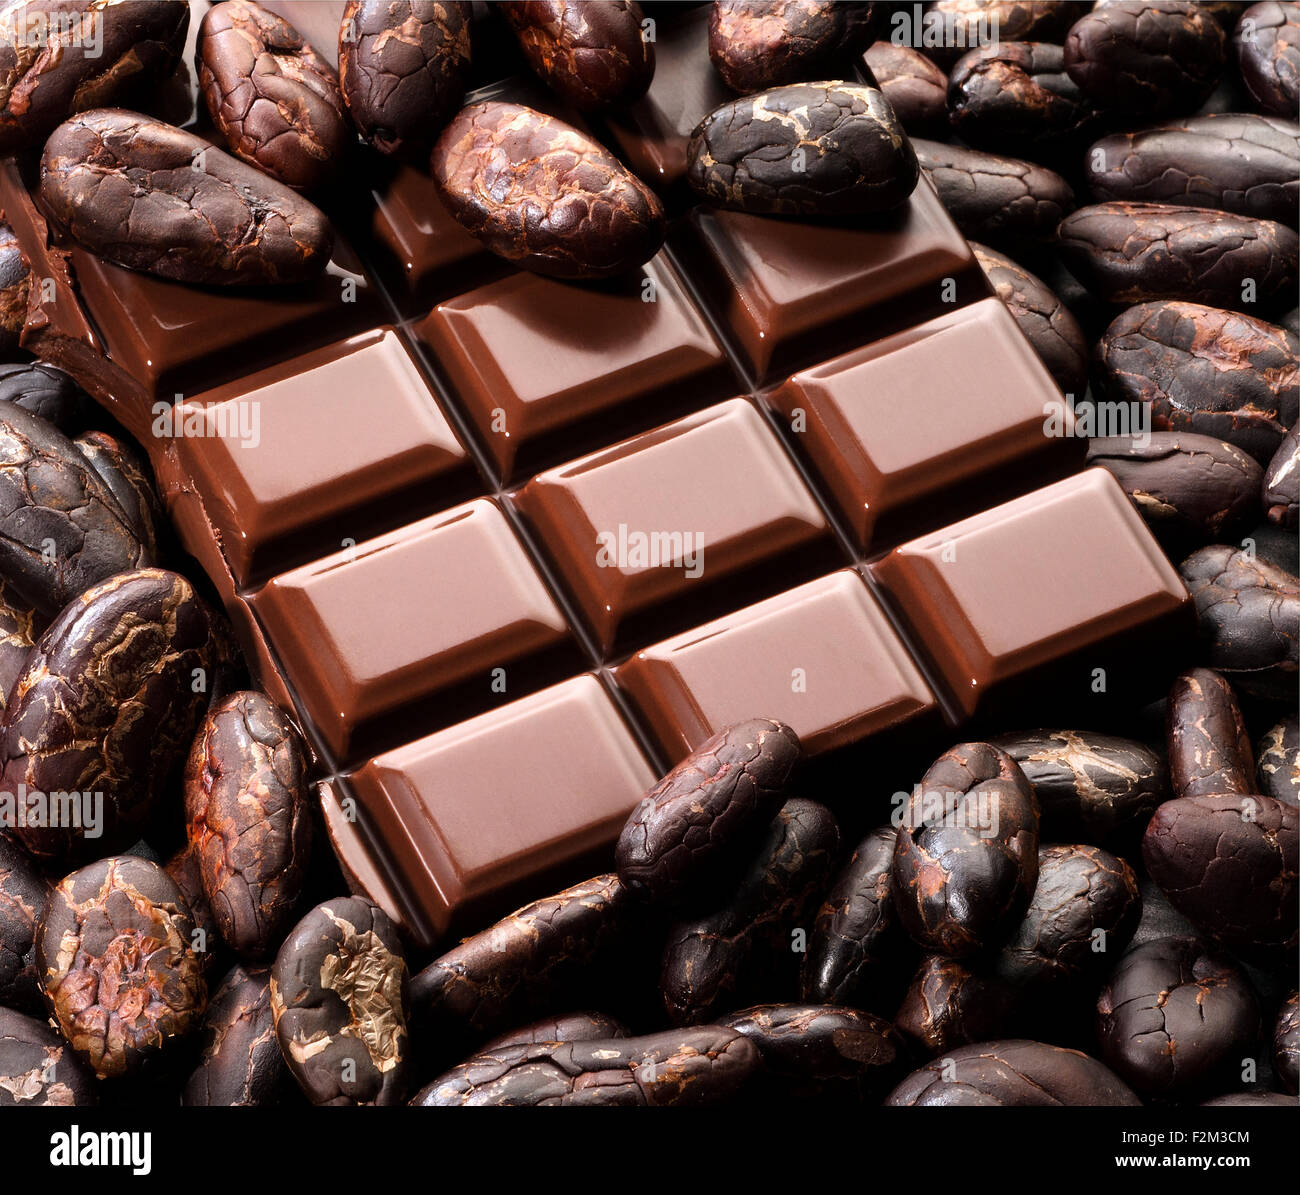 Cocoa beans and chocolate bar Stock Photo